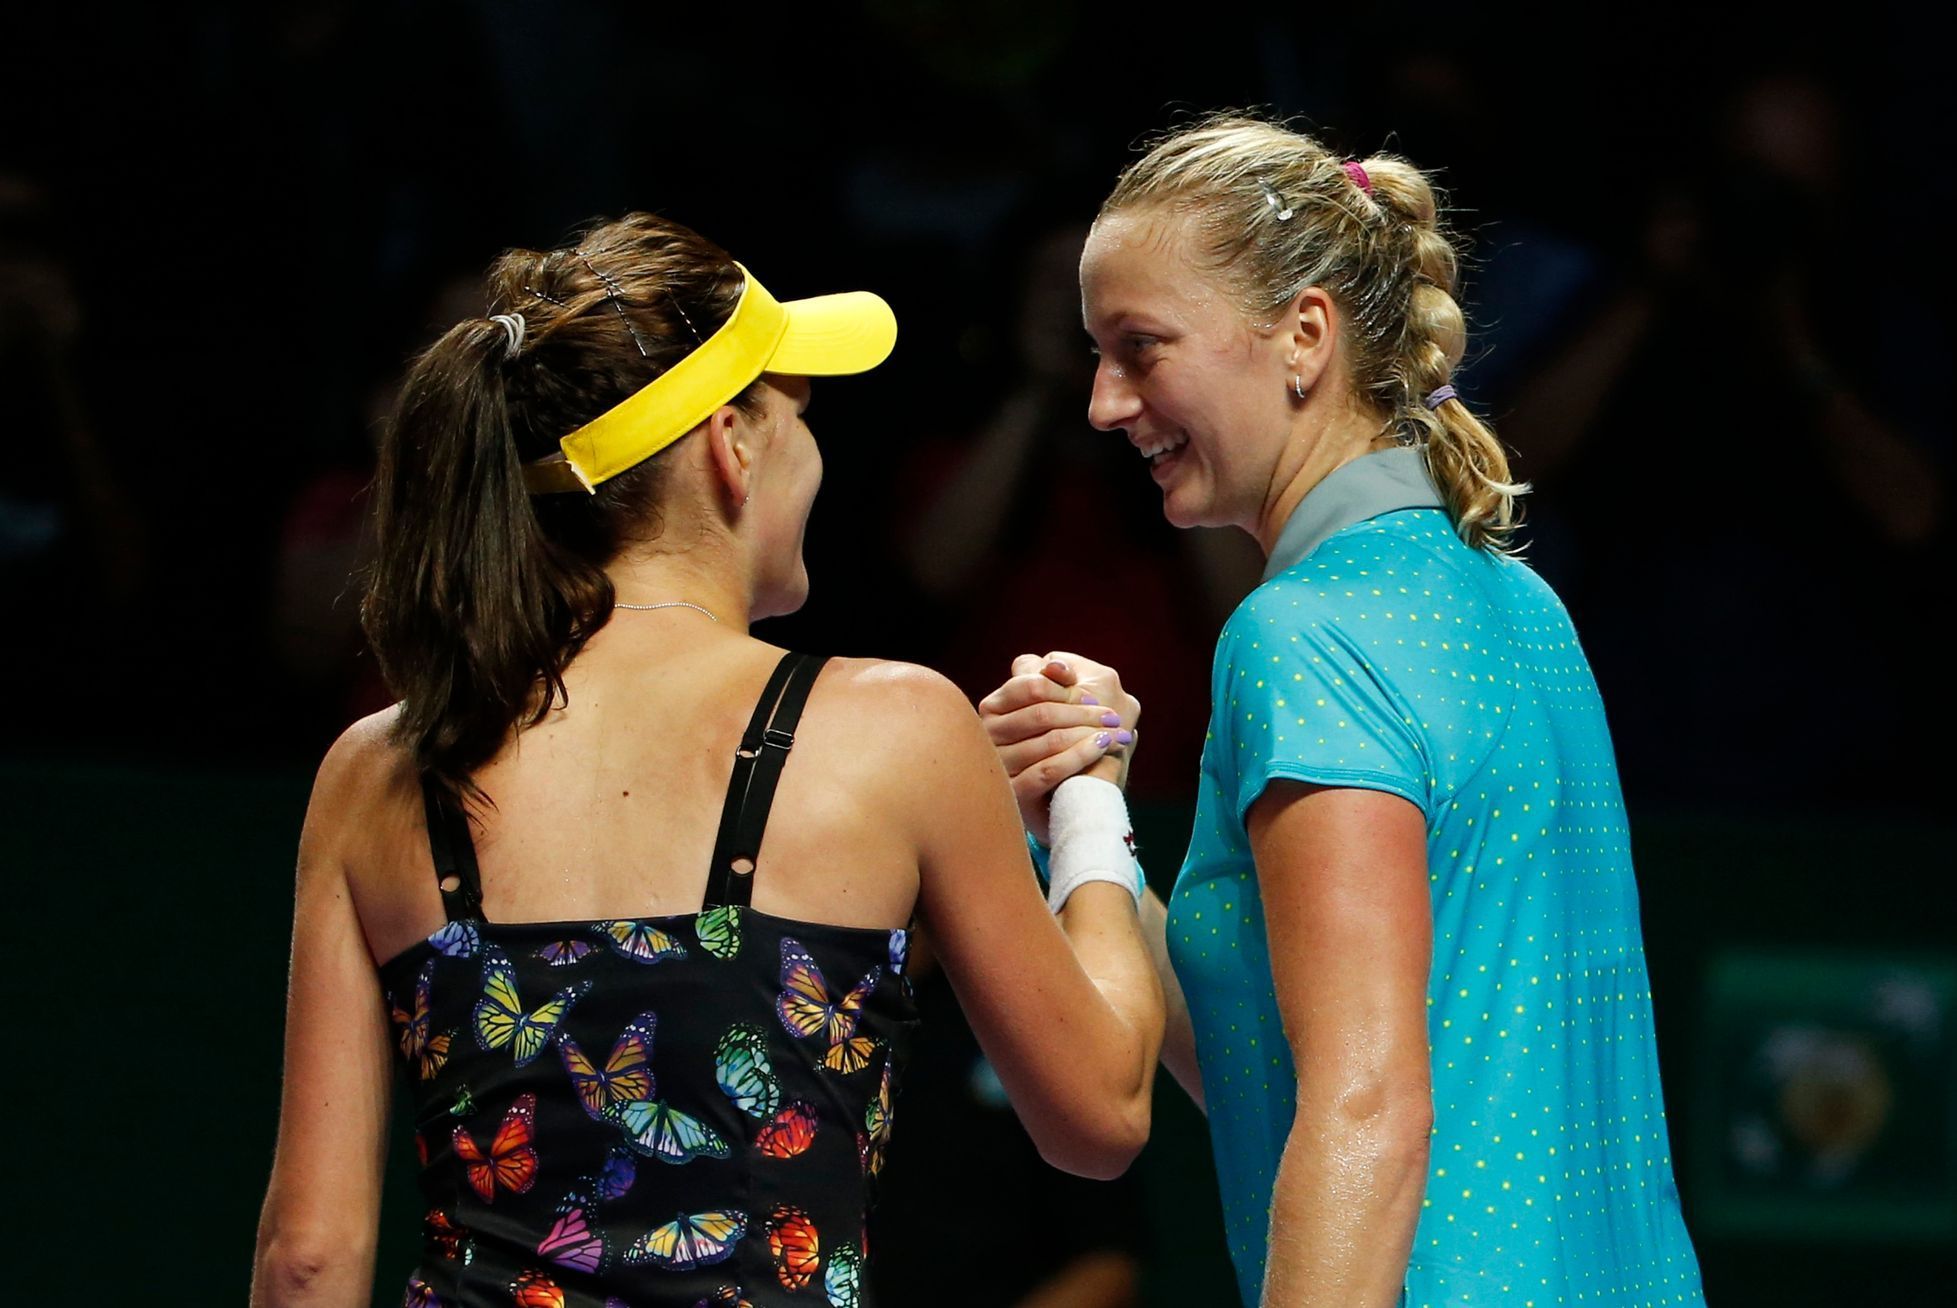 Radwanska of Poland is congratulated by Kvitova of the Czech Republic during their WTA Finals singles tennis match at the Singapore Indoor Stadium